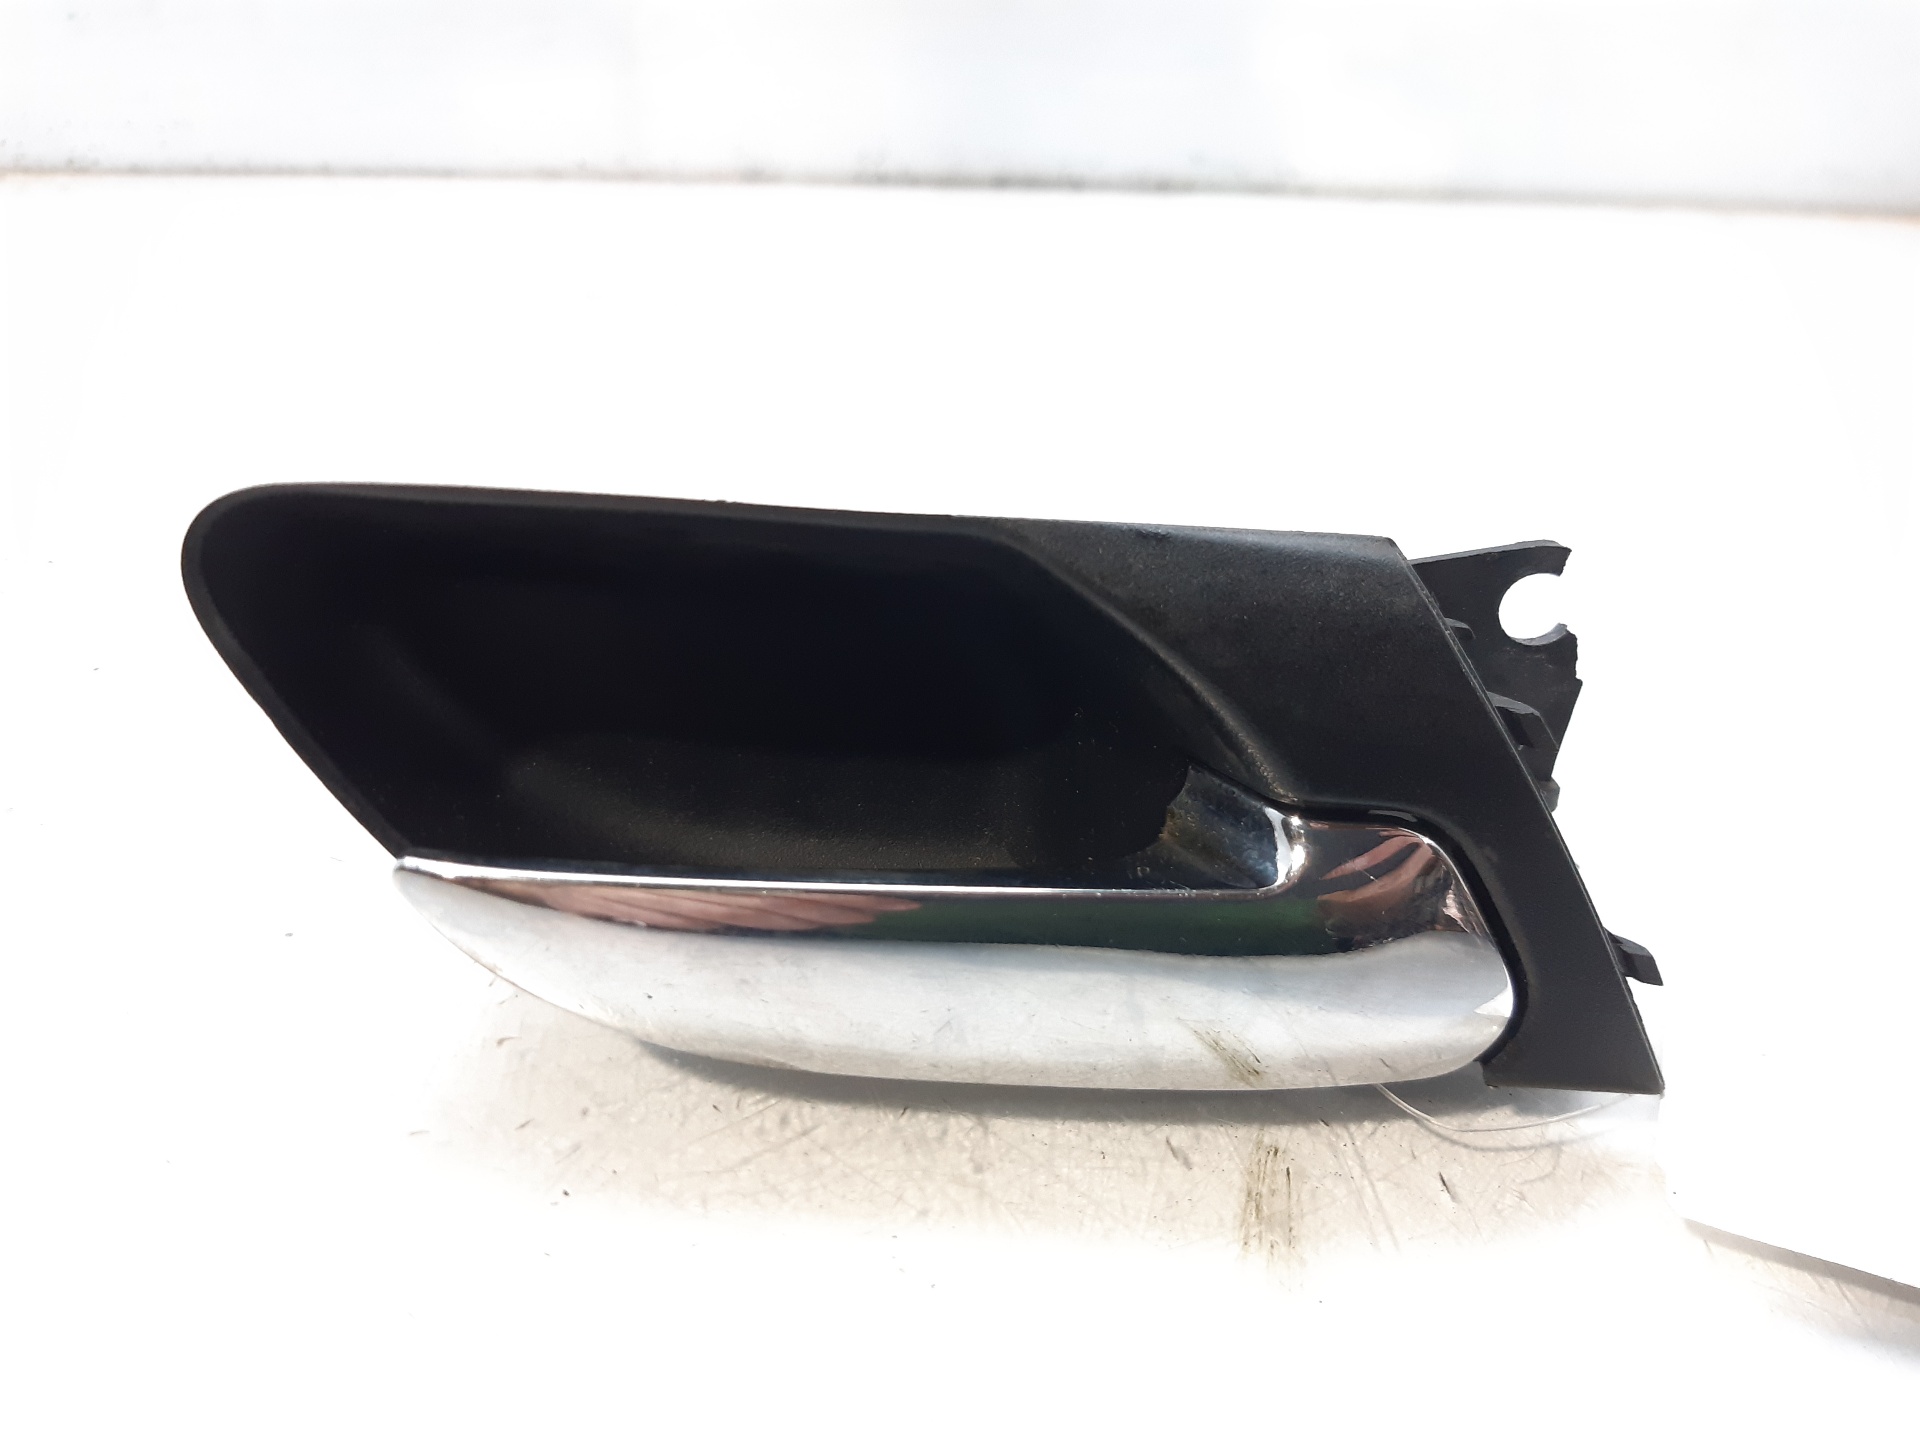 BMW 3 Series E46 (1997-2006) Other Interior Parts 51418200724 22020140